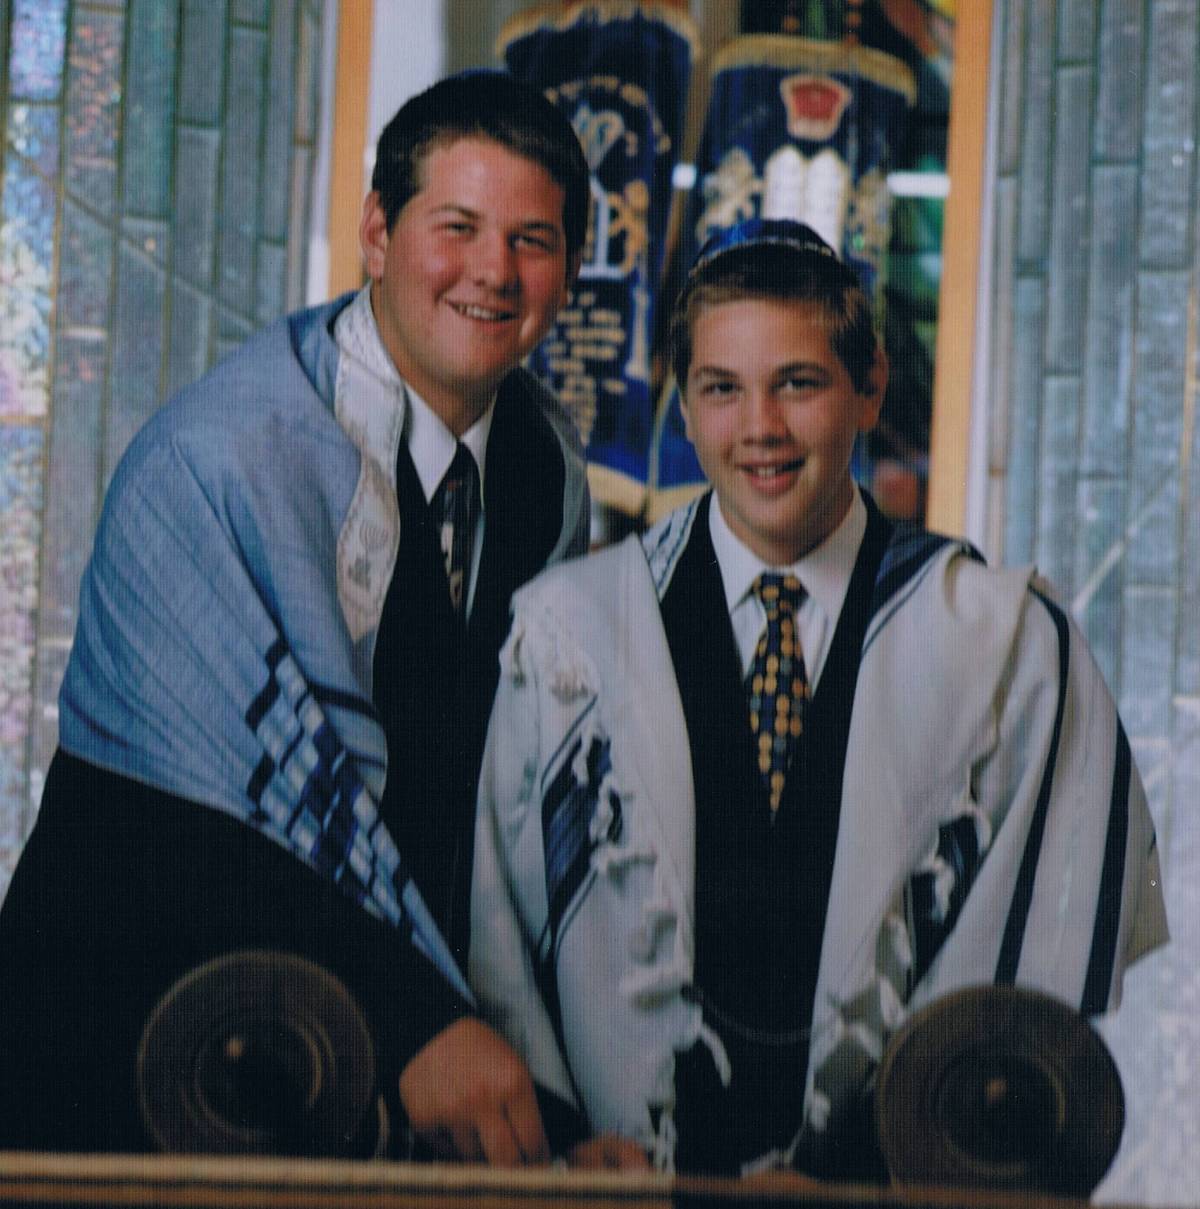 The Schwartz brother at shul. (John Solano Photography)